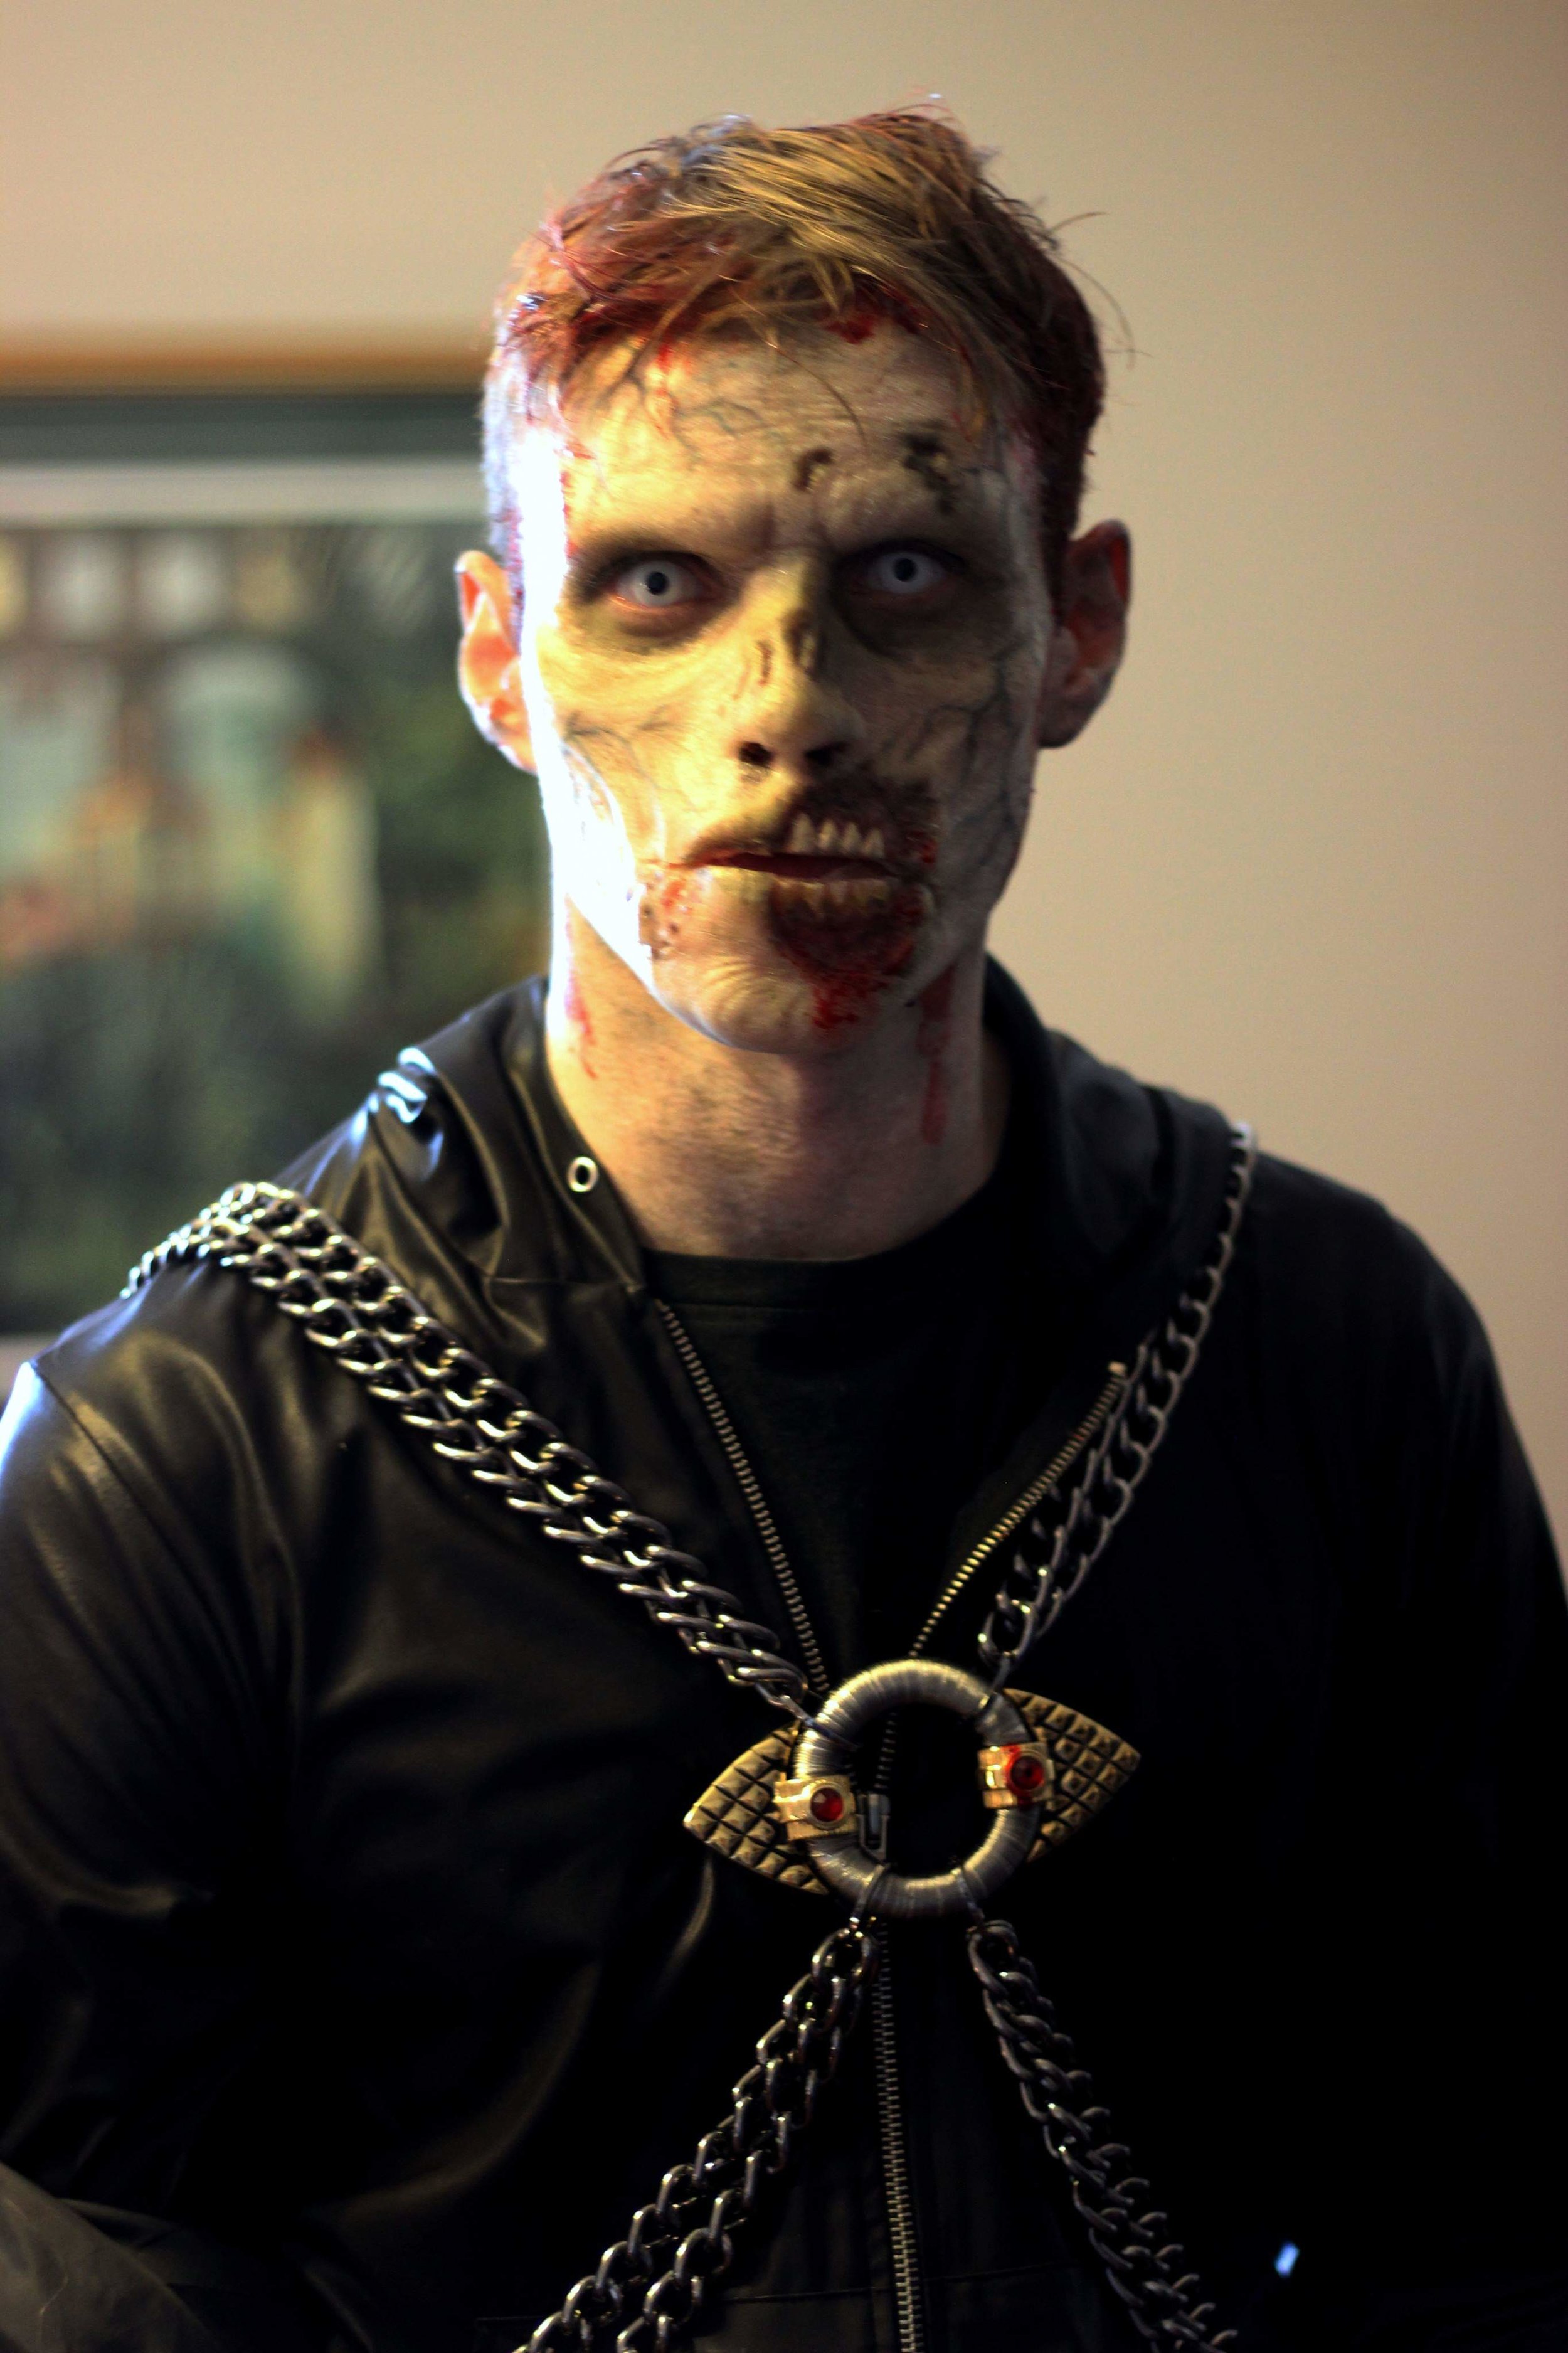  Zombie for Sickick Music Video  Photo and Makeup by Rhonda Morley Causton of Reel Twisted Effects 